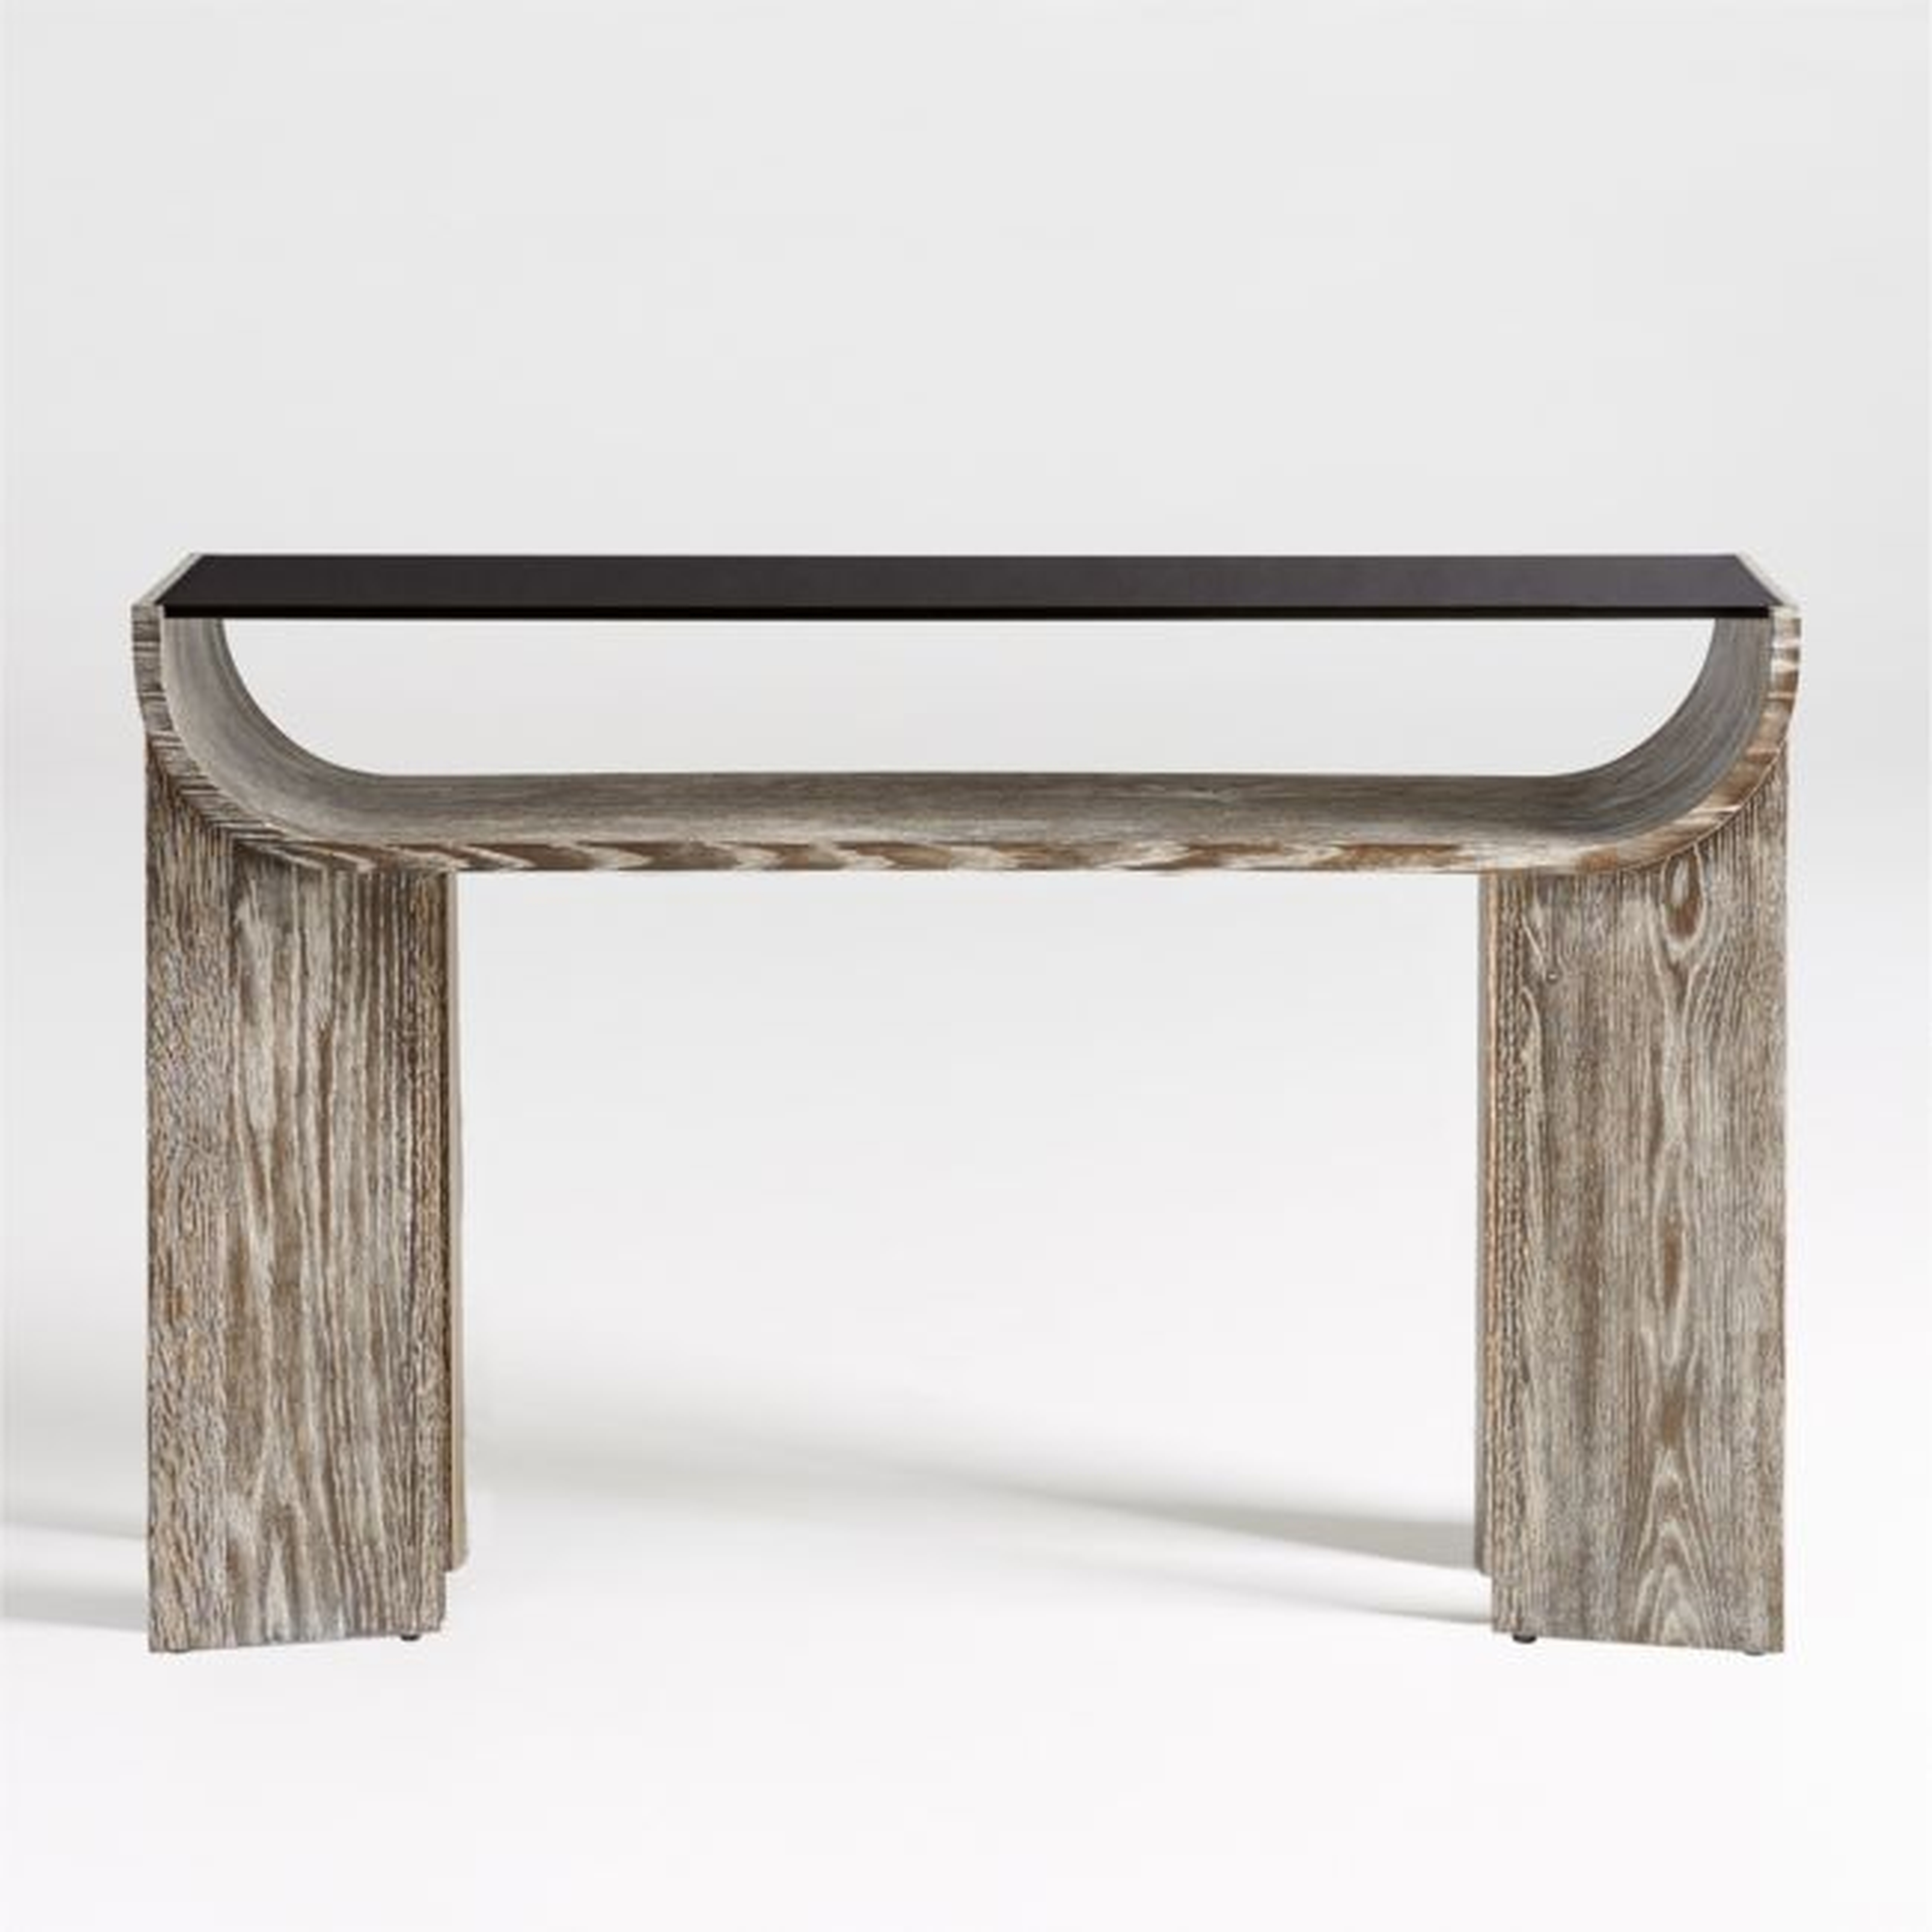 Dada 54" Rectangular Oak Wood and Tempered Glass Console Table with Shelf - Crate and Barrel